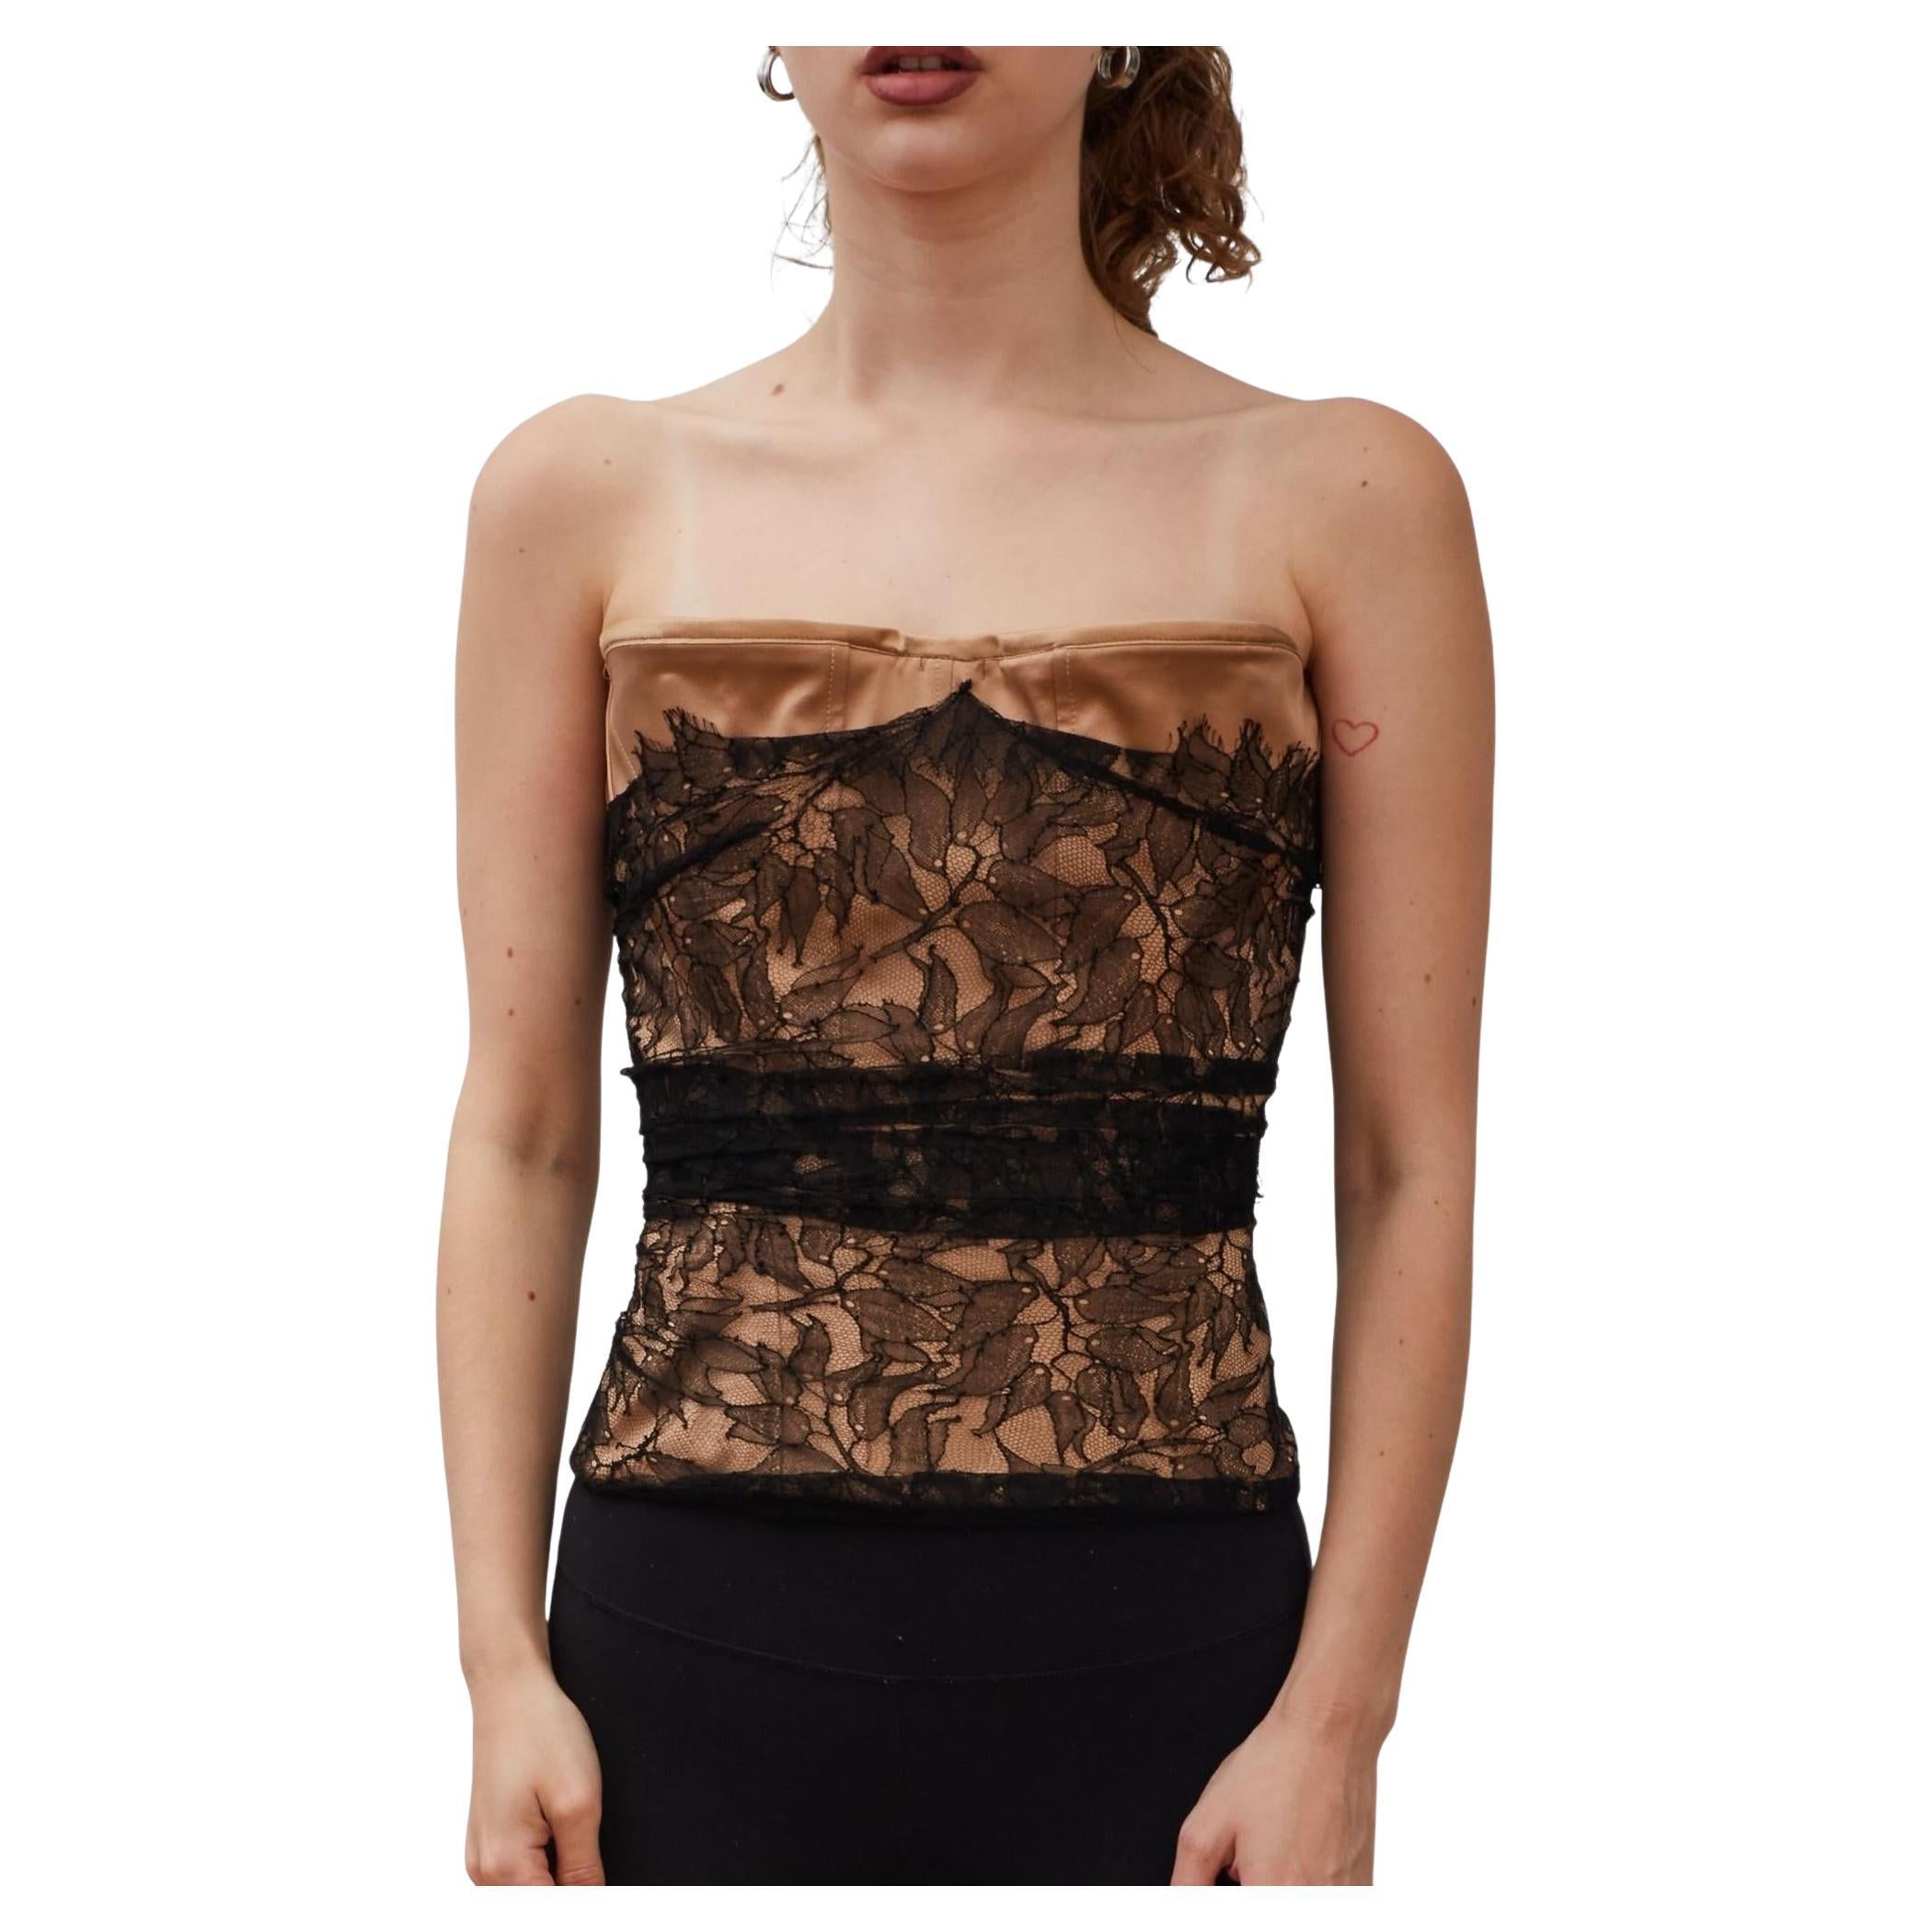 Guy Laroche Tulle Lace Black Overlay Nude Corset Top (FR42  Large)